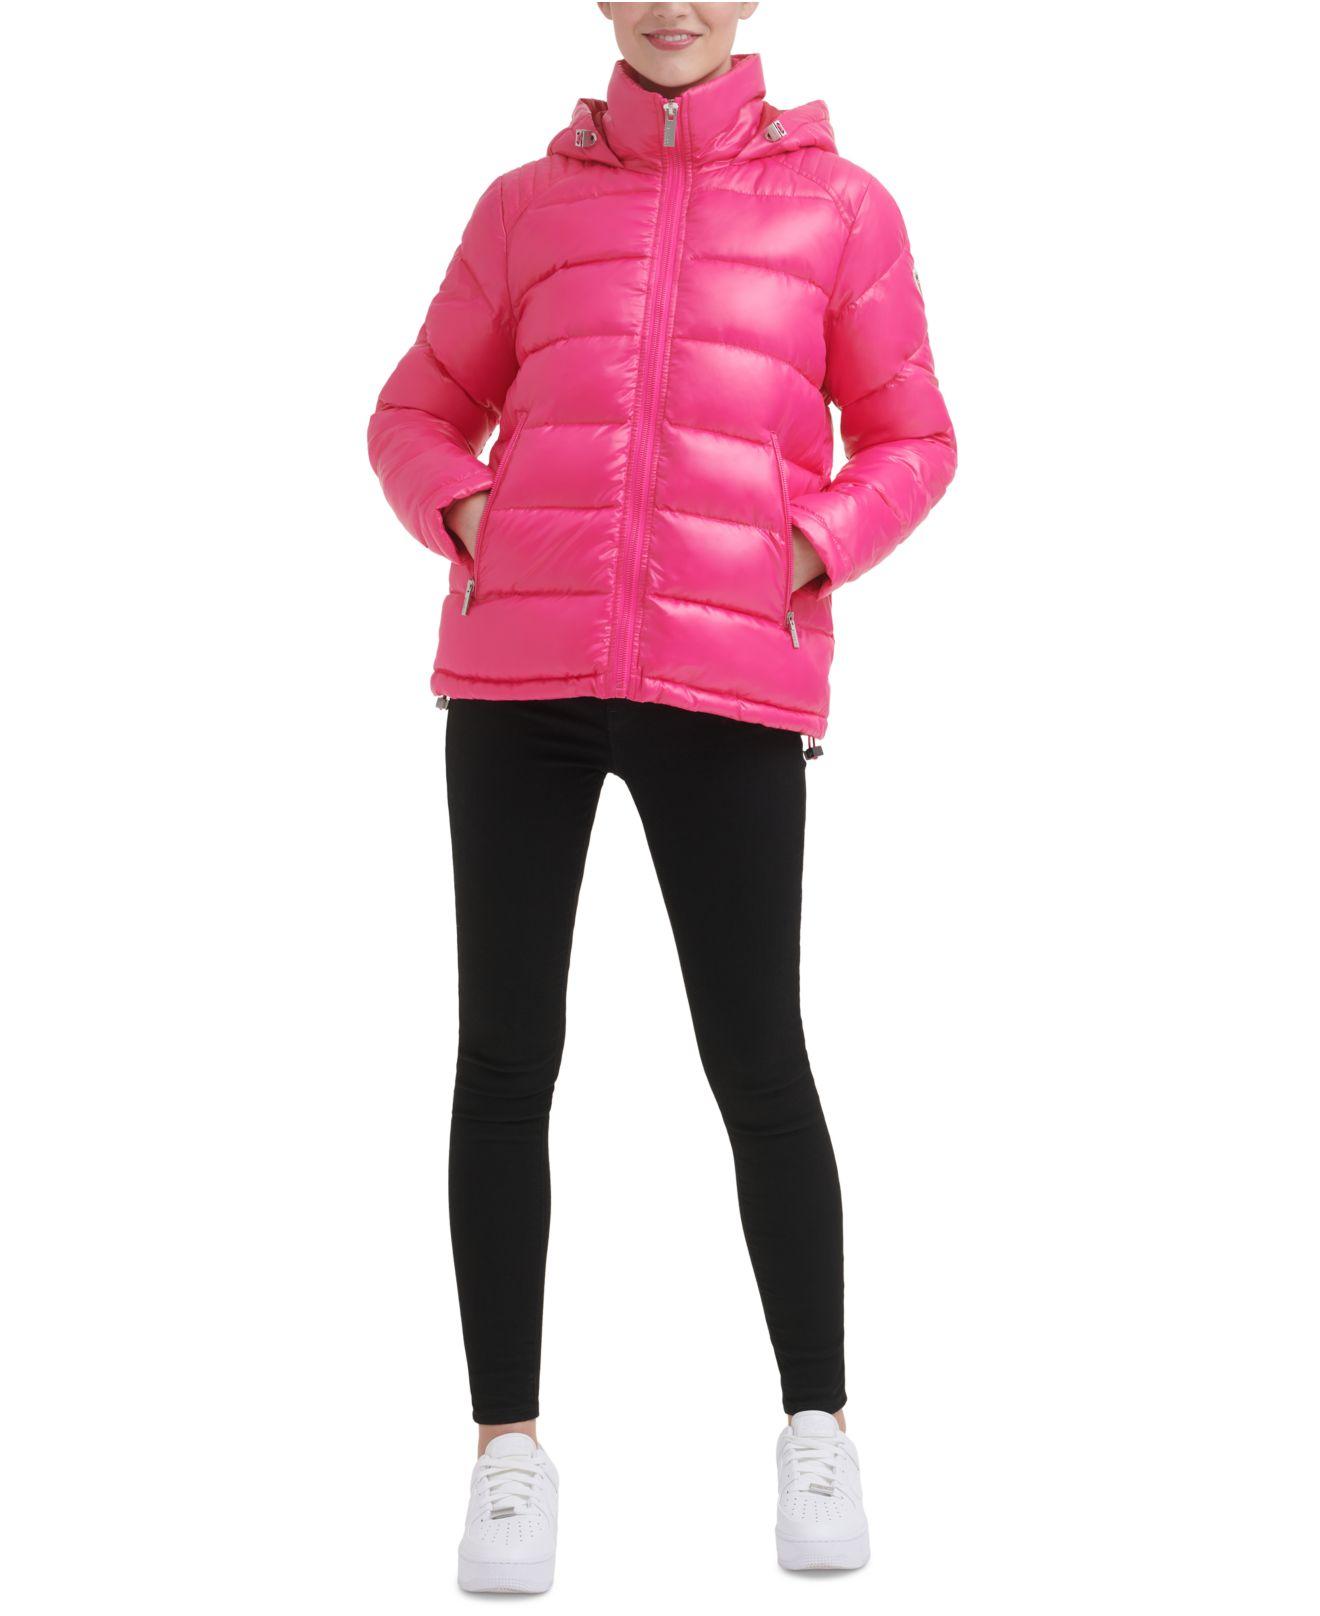 Guess High-shine Hooded Puffer Coat in Pink | Lyst